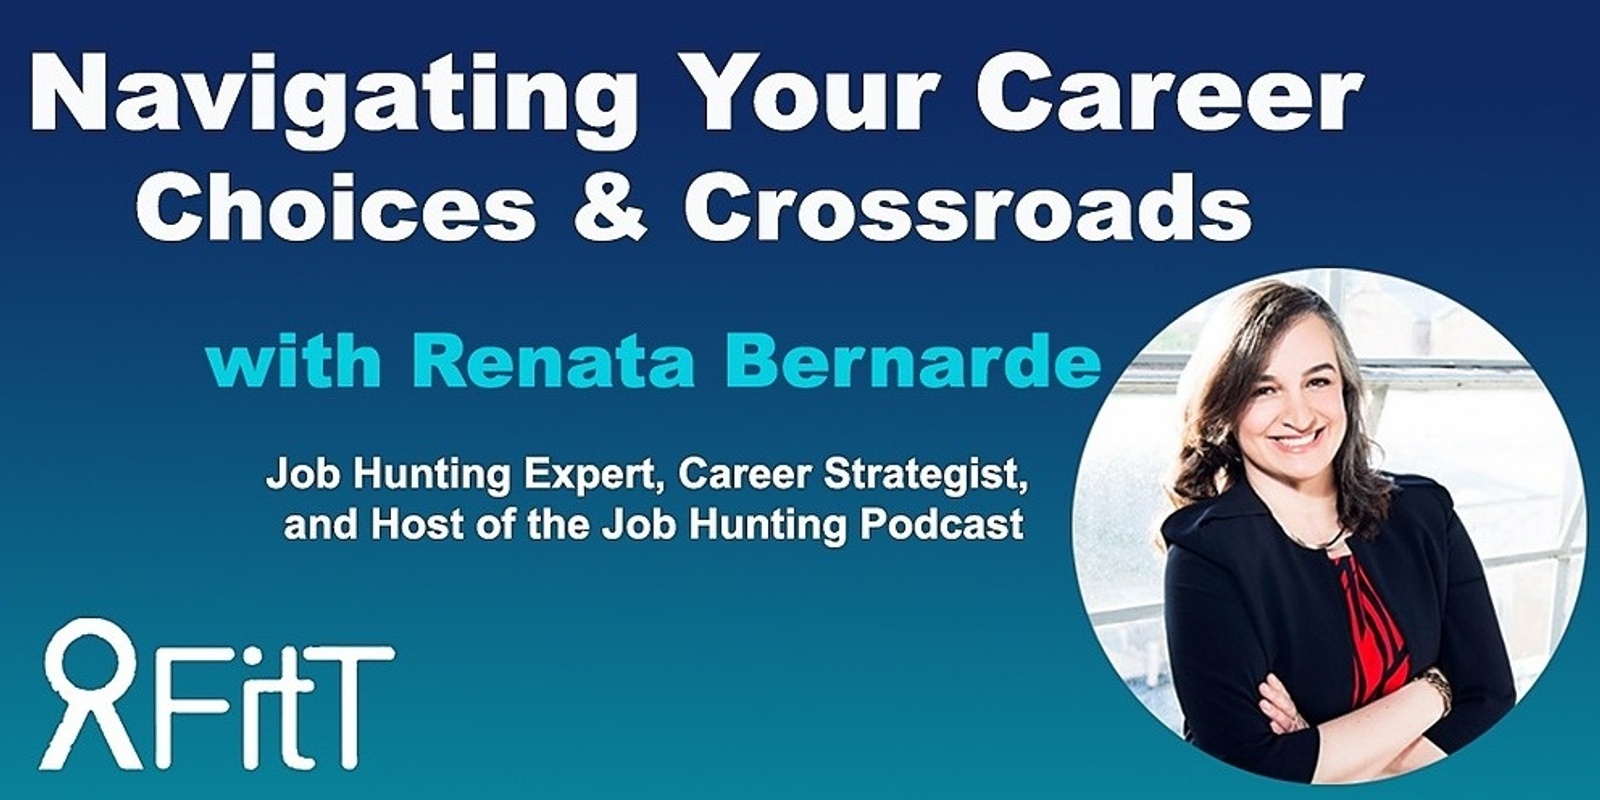 Banner image for FitT eWorkshop - Navigating Your Career - Women’s career choices and crossroads with Renata Bernarde